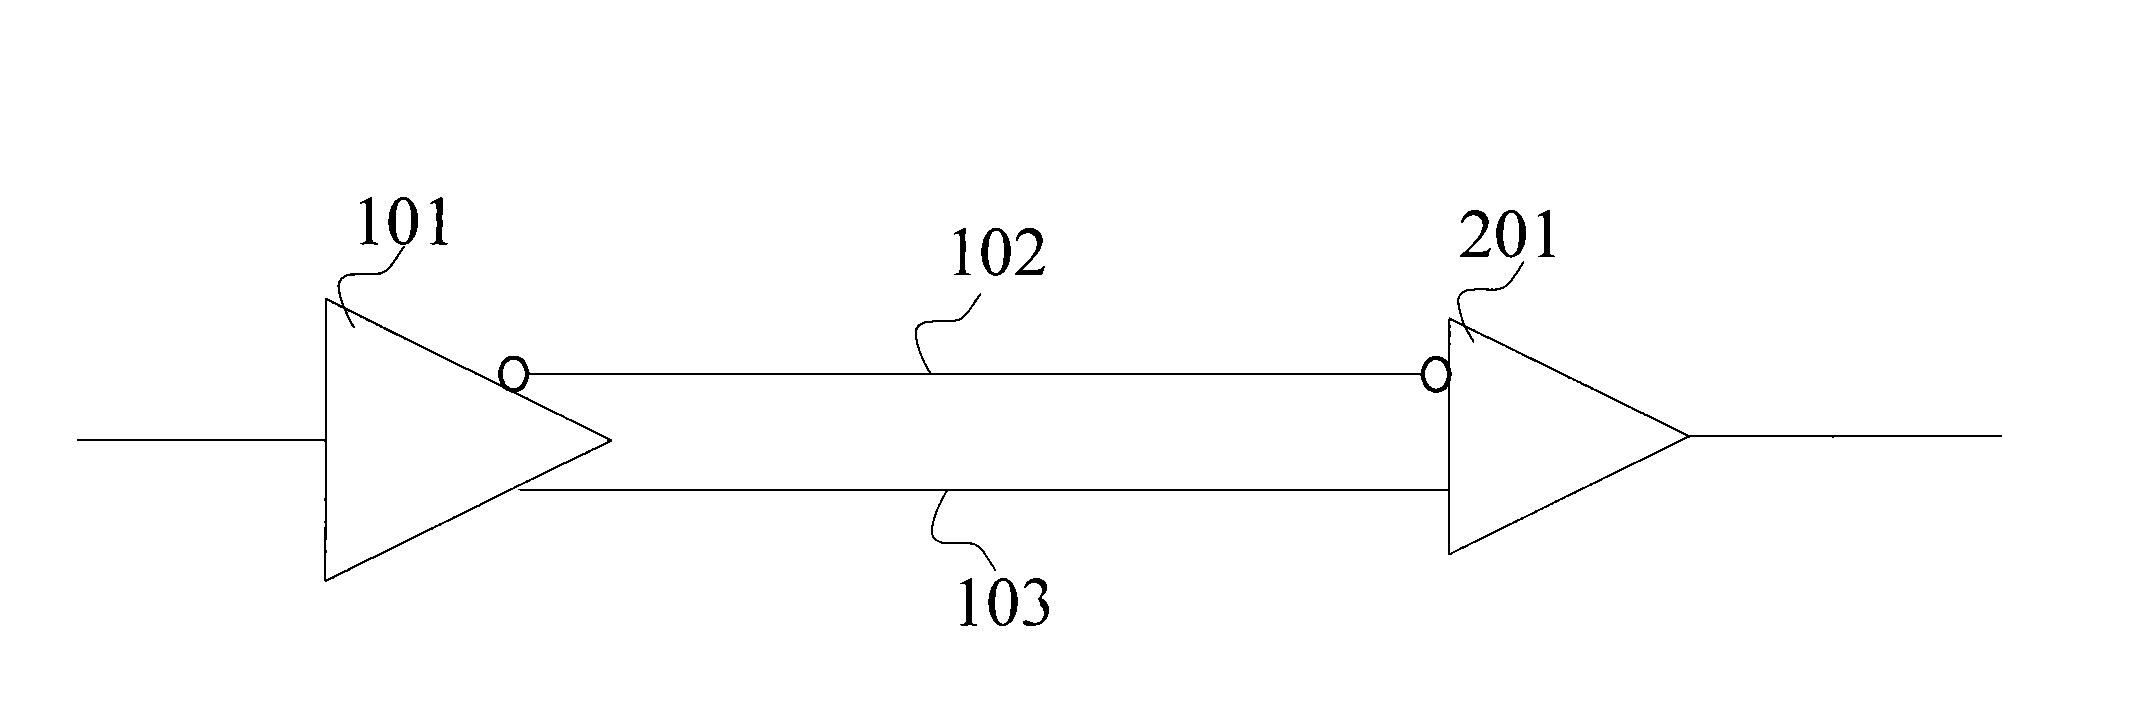 Device and method for impedance matching and bias compensation for difference transmission lines